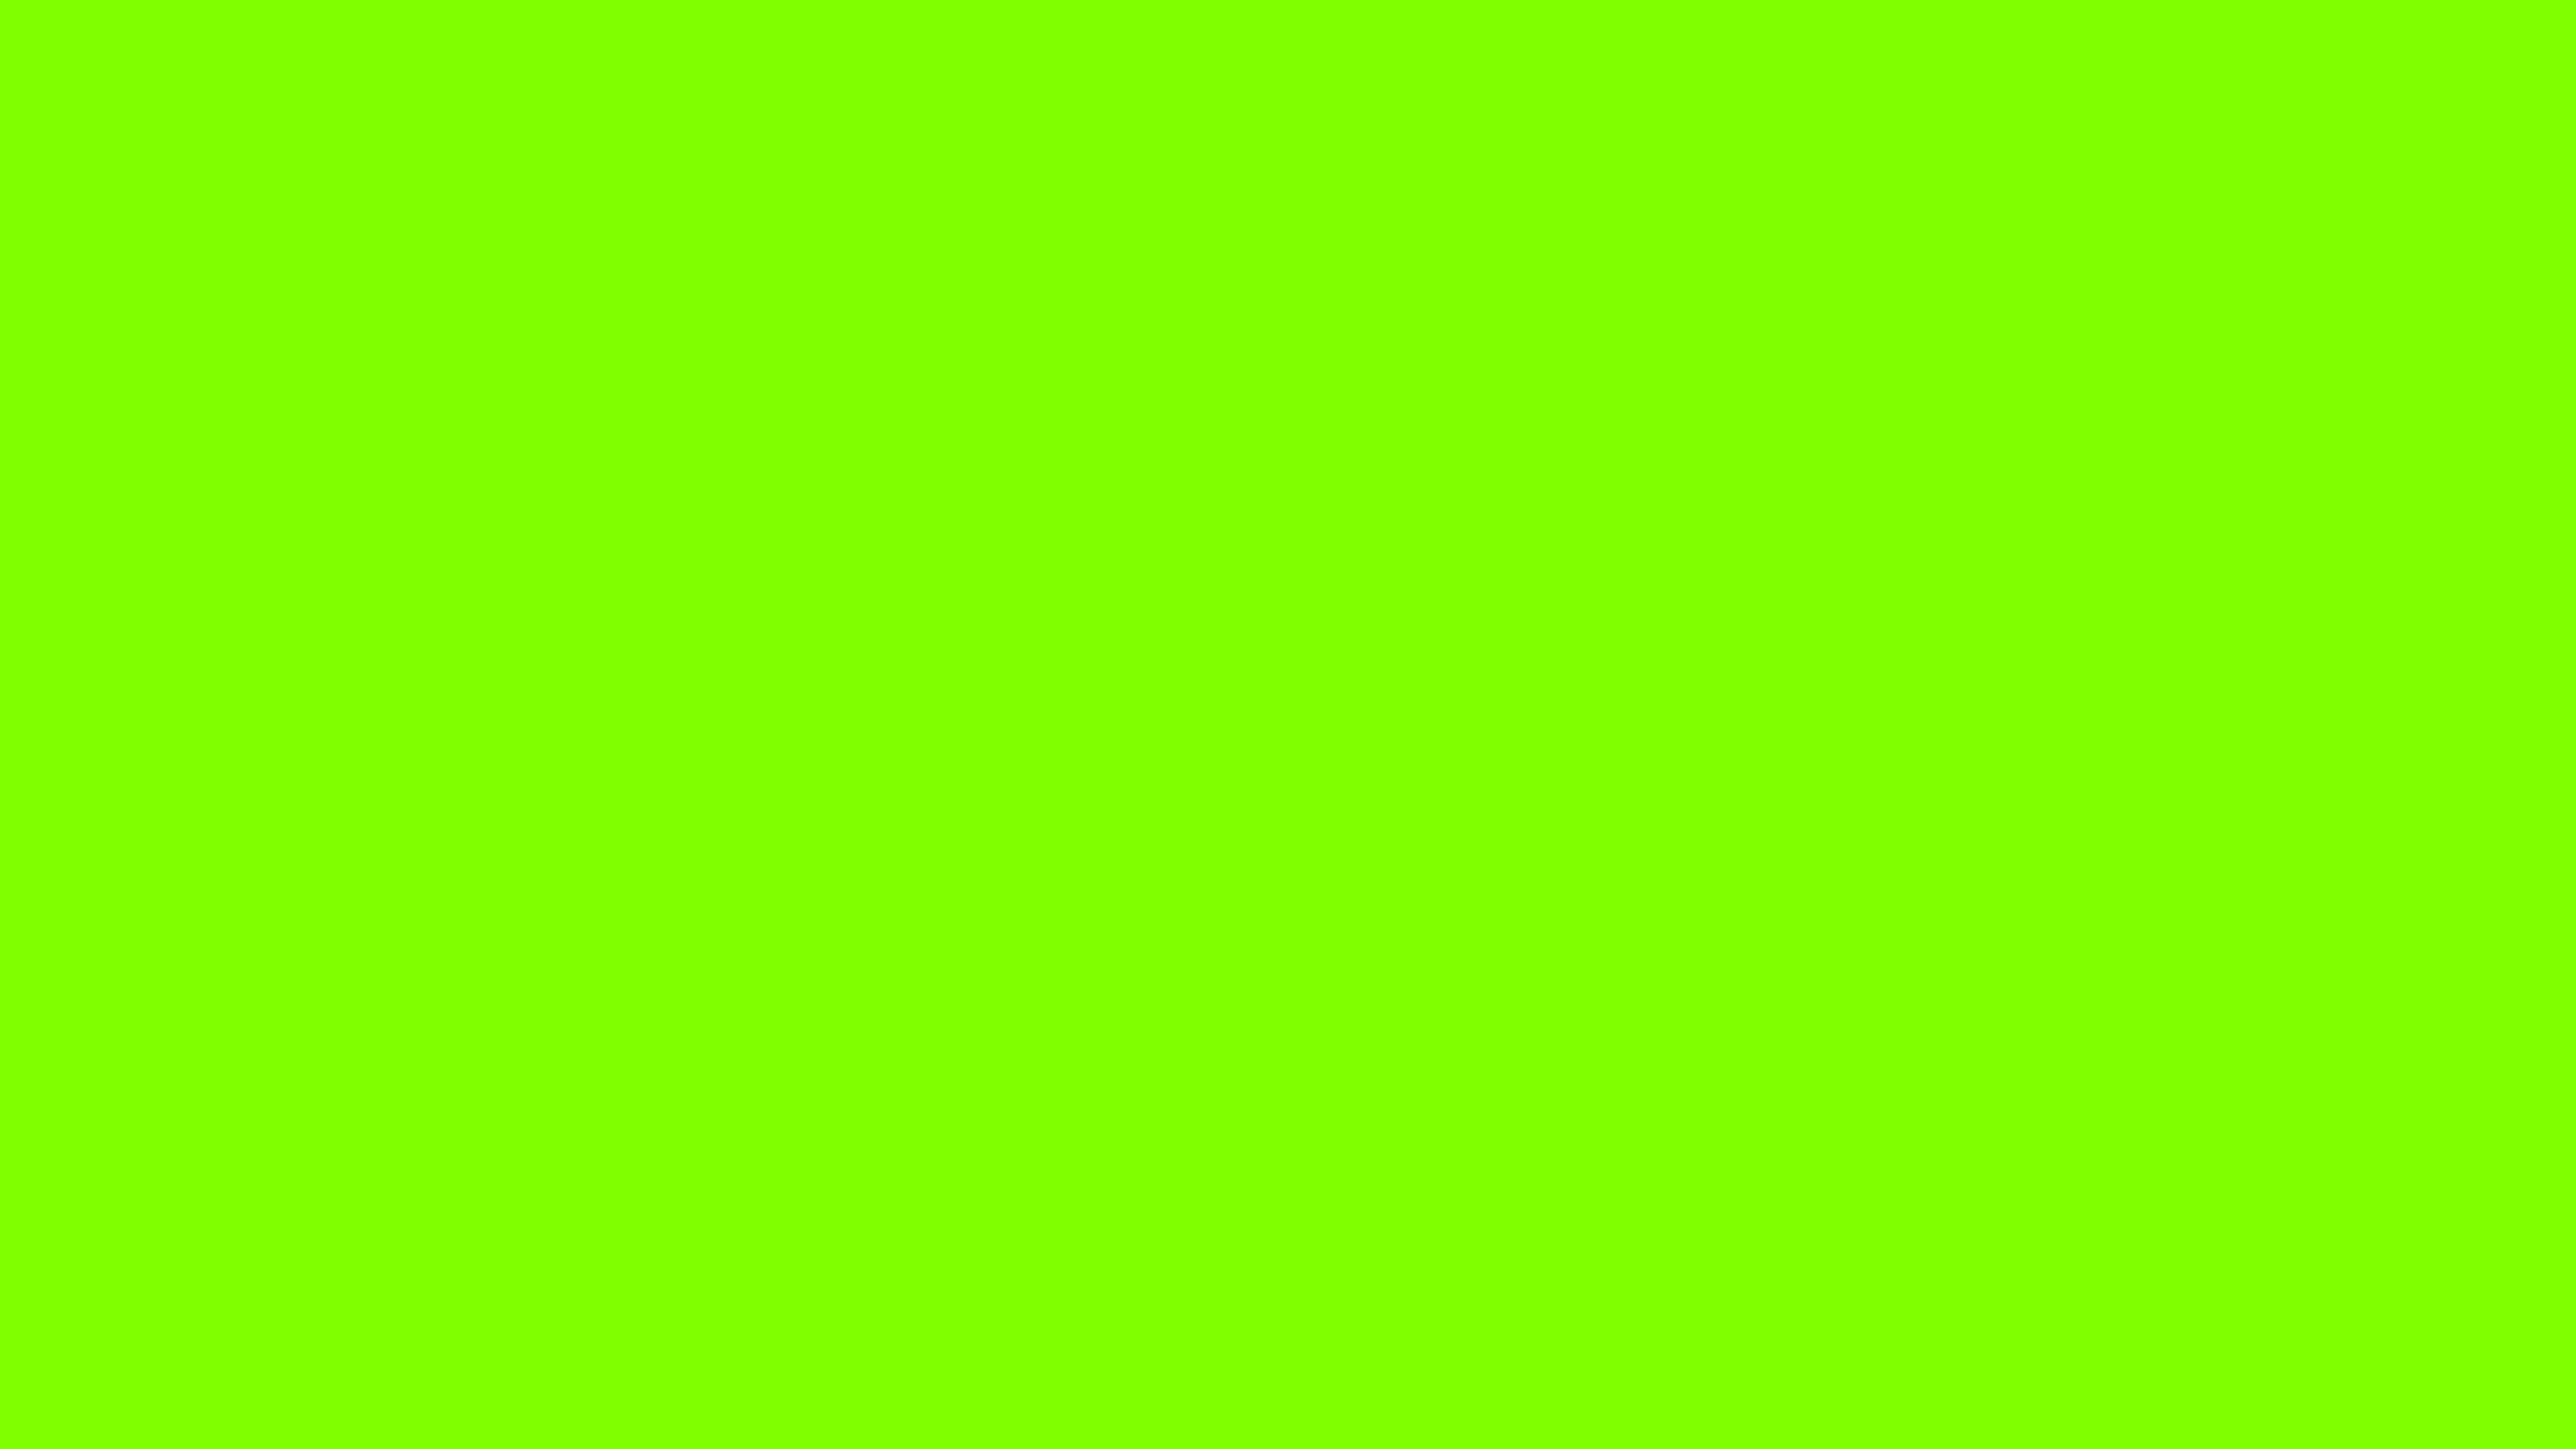 7680x4320 Chartreuse For Web Solid Color Background